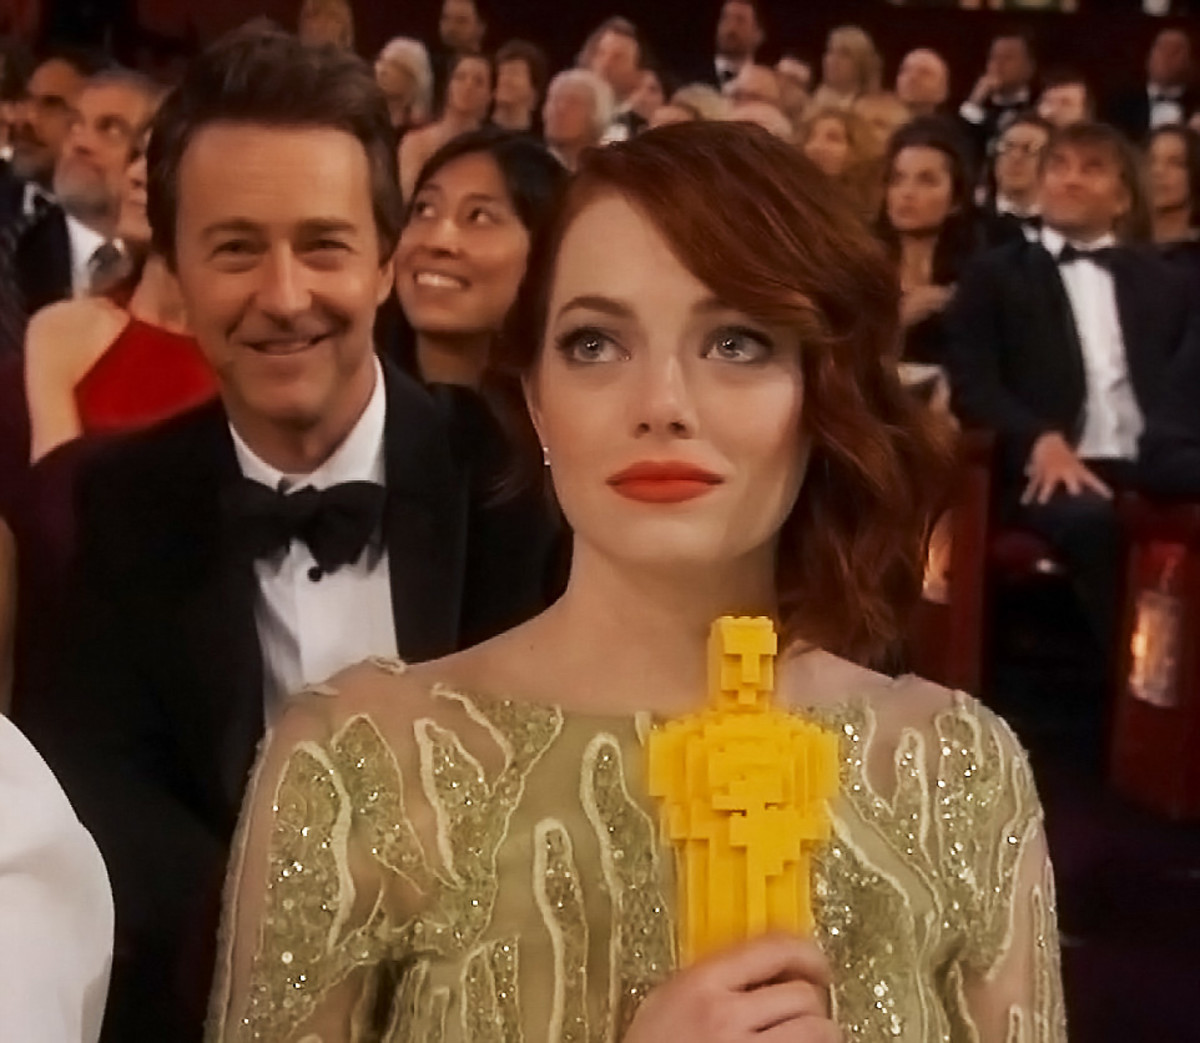 Emma Stone at the 2015 Oscars with a LEGO Academy Award_makeup by Revlon and Chanel